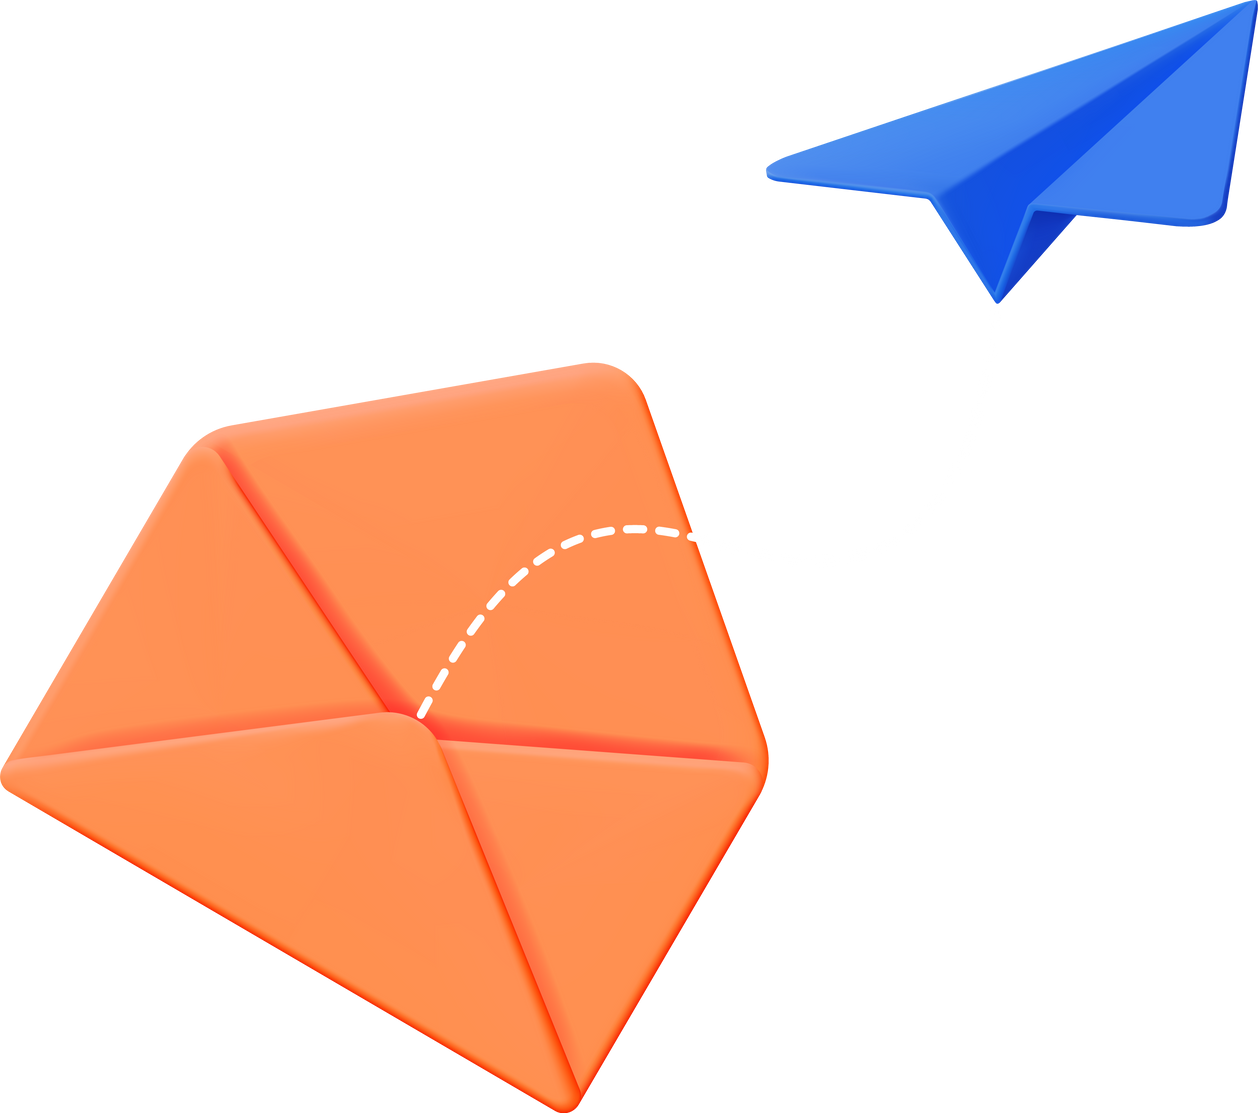 3D Mail Envelope in Paper Plane